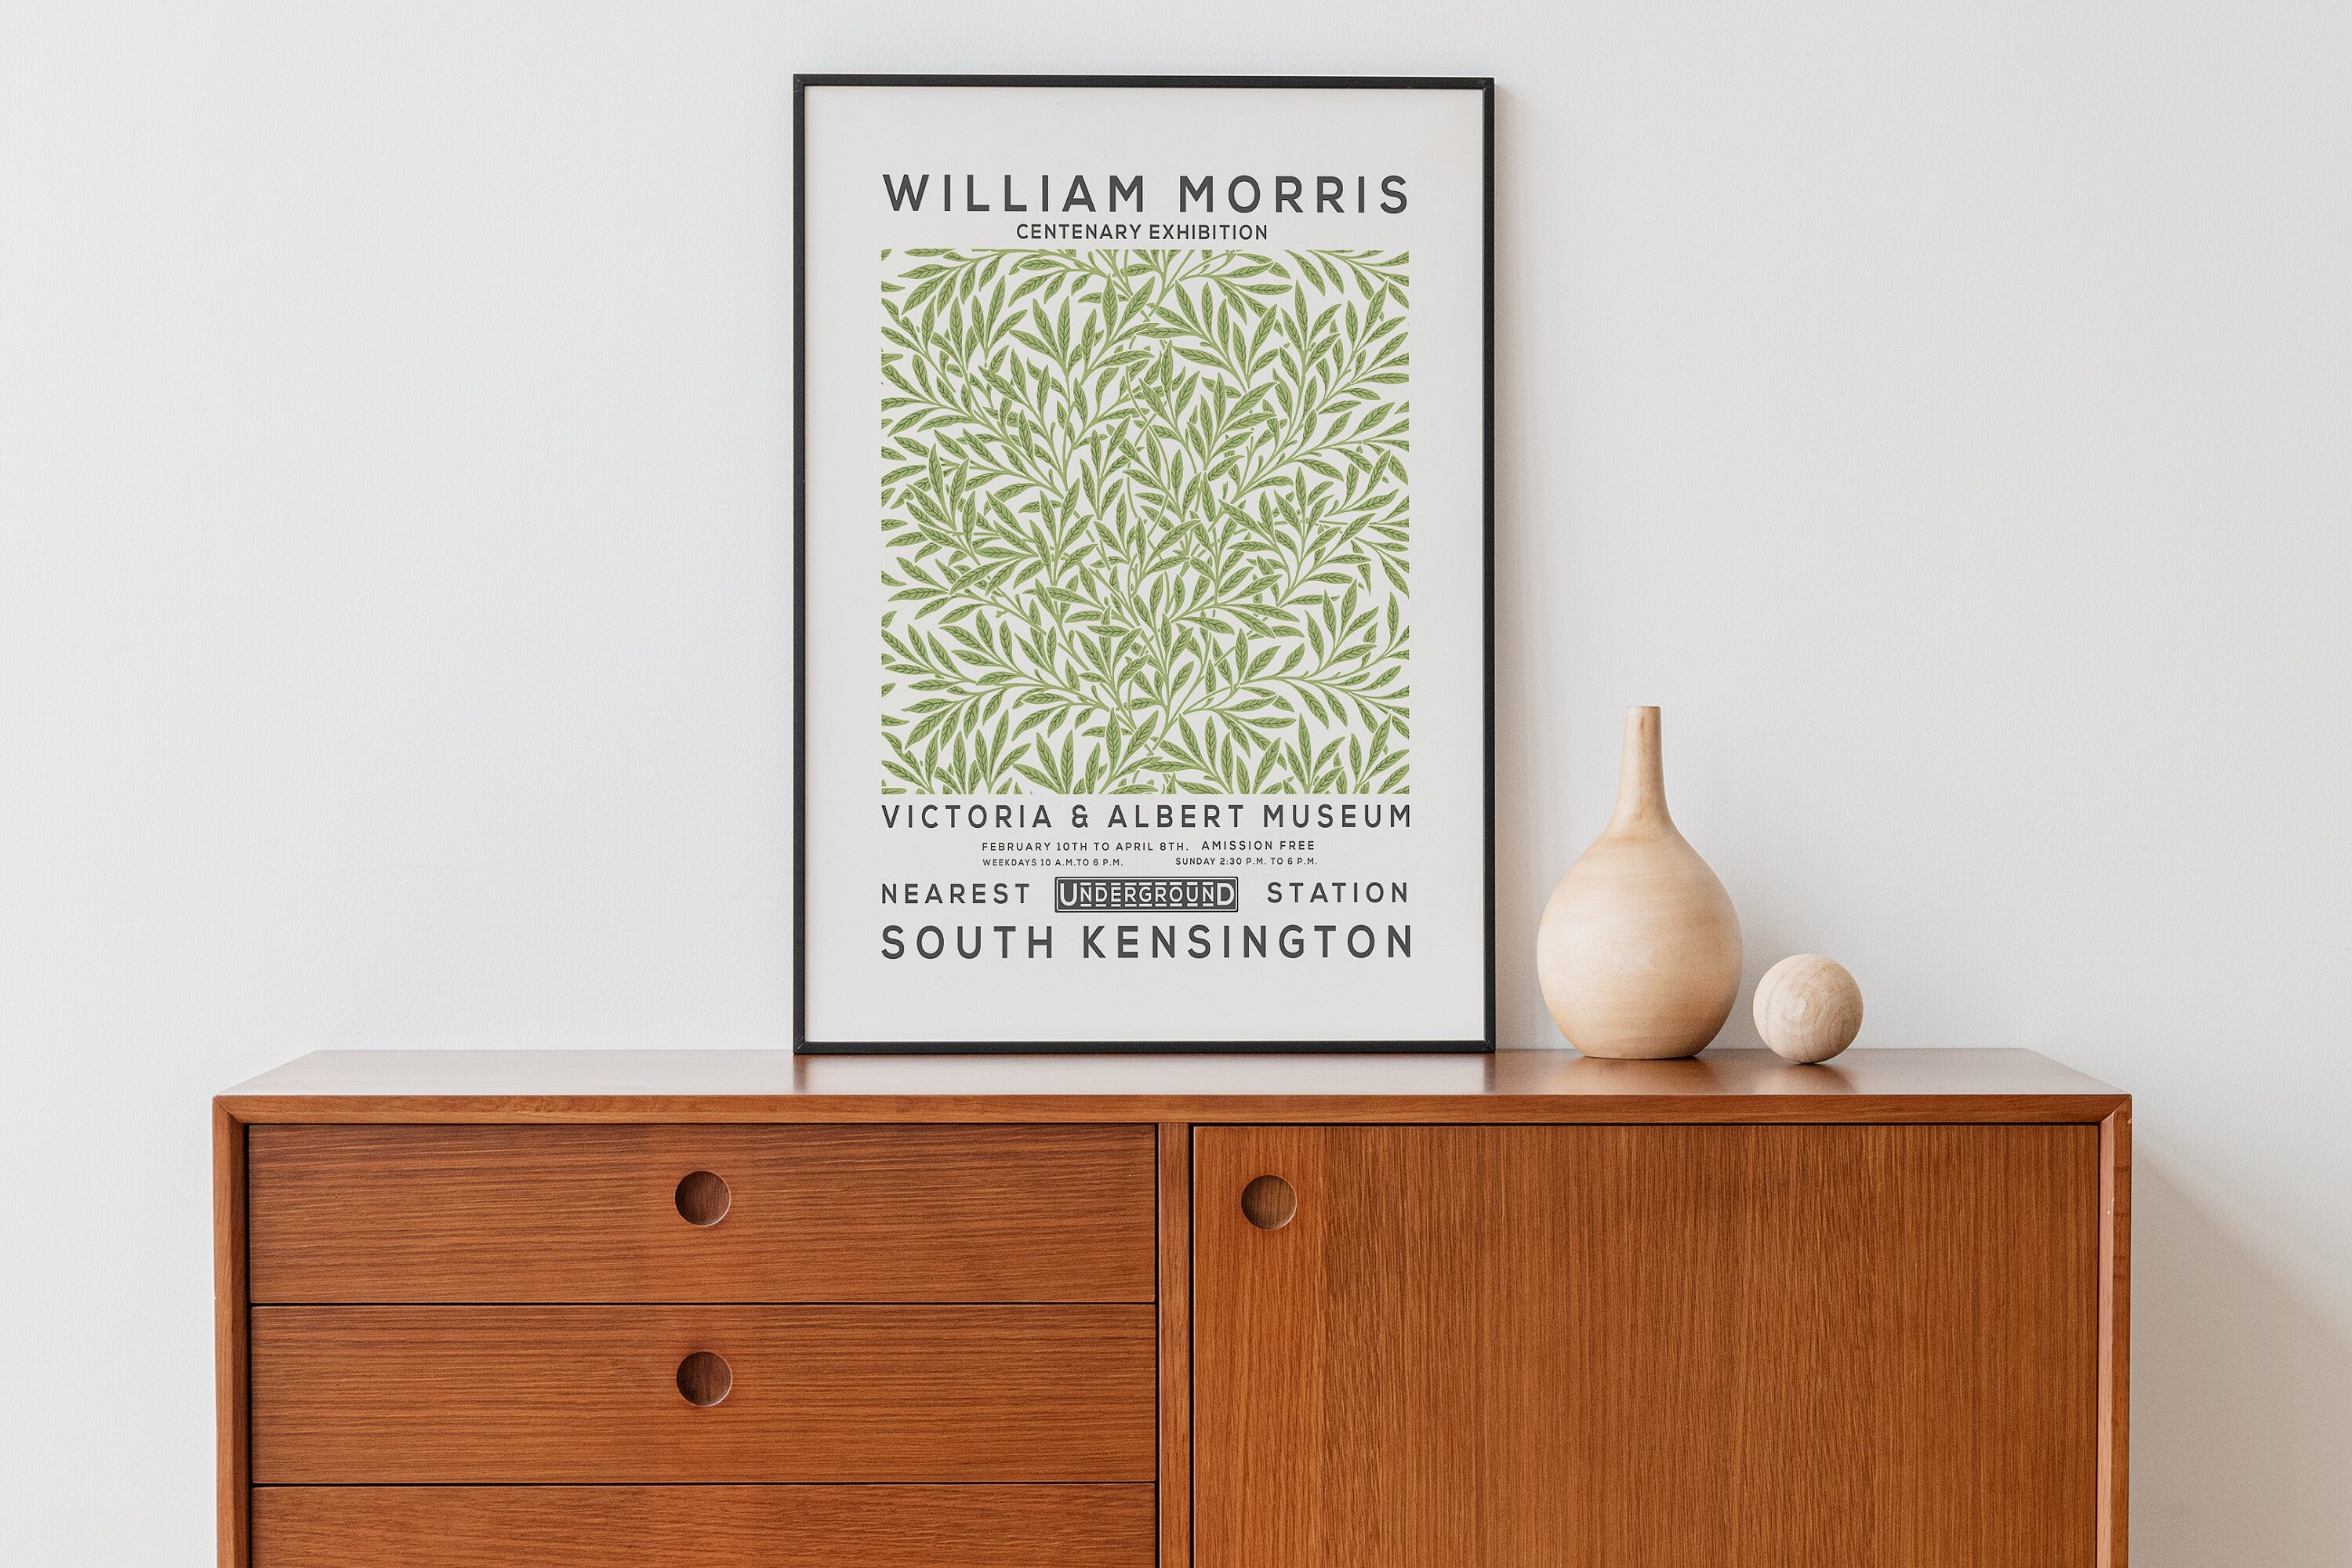 William Morris Print, Vintage Wall Decor, Exhibition Poster, Floral Wall Art, Flower Print, Home Decor, Willow Pattern